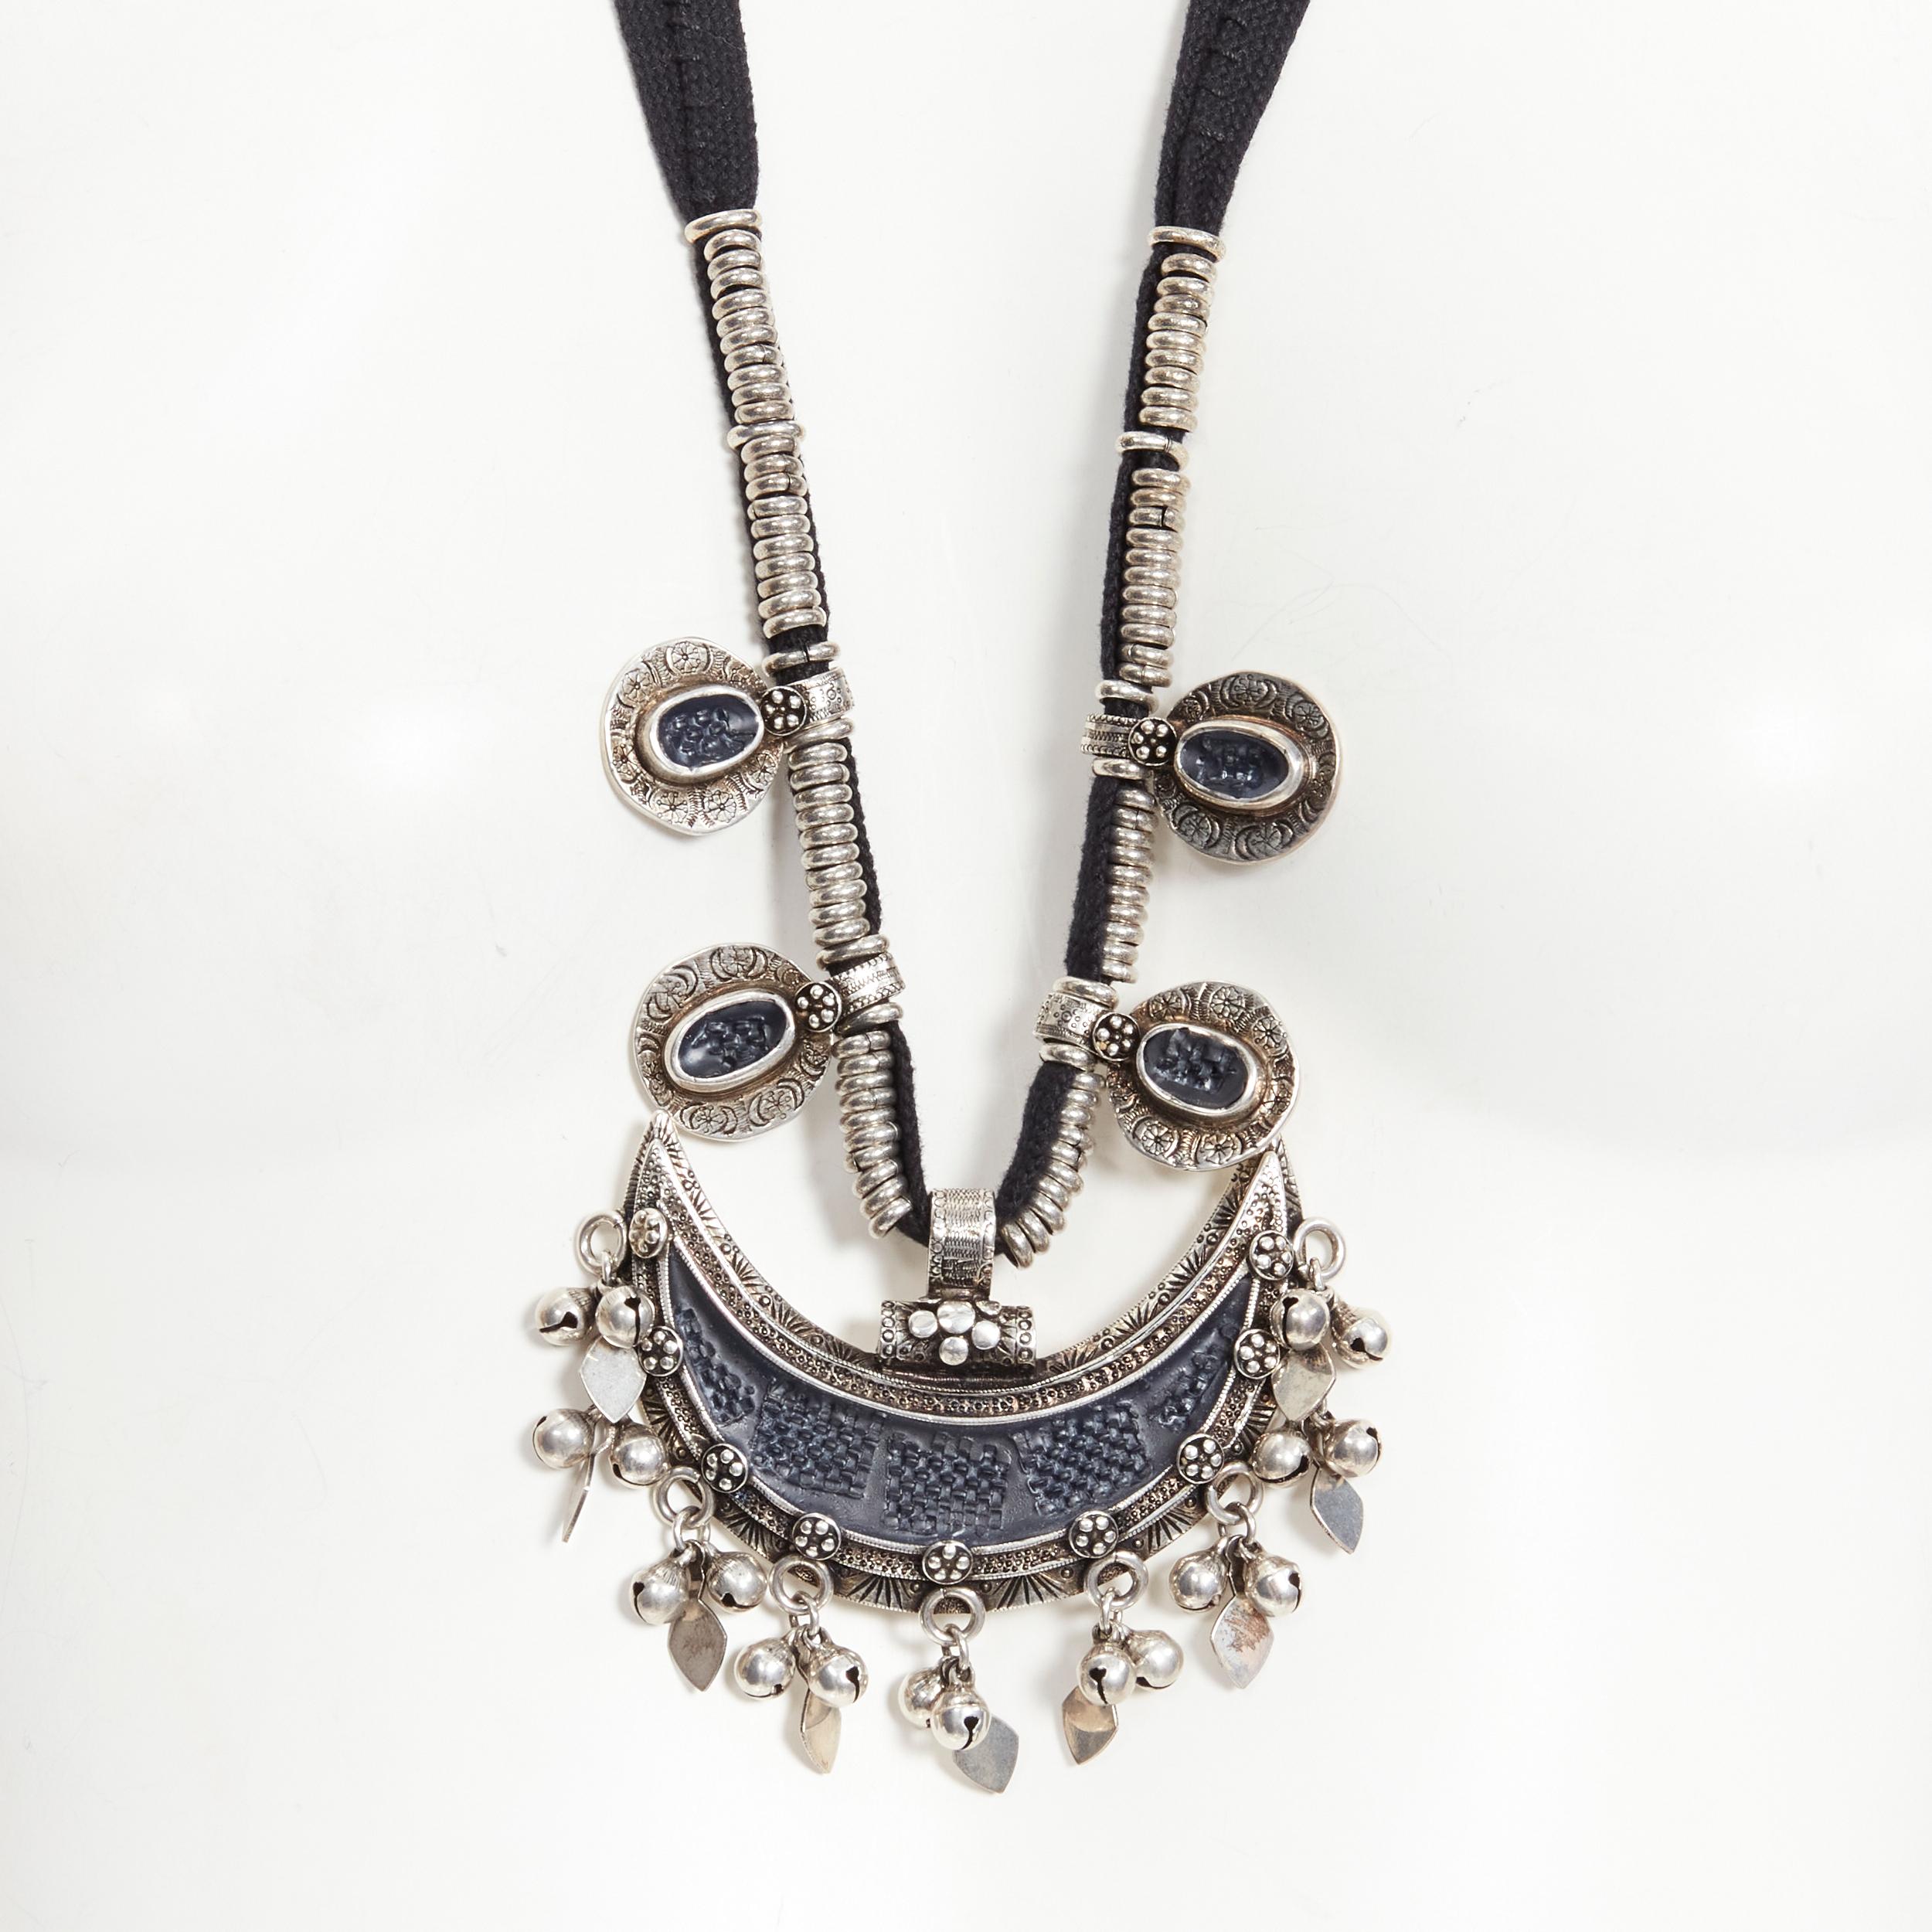 rare SAINT LAURENT Hedi Slimane Marrakech Runway stone crescent moon necklace 
Reference: TGAS/B01691 
Brand: Saint Laurent 
Designer: Hedi Sliman 
Material: Metal 
Color: Silver 
Pattern: Solid 
Closure: Lobster 
Extra Detail: Stone embellished